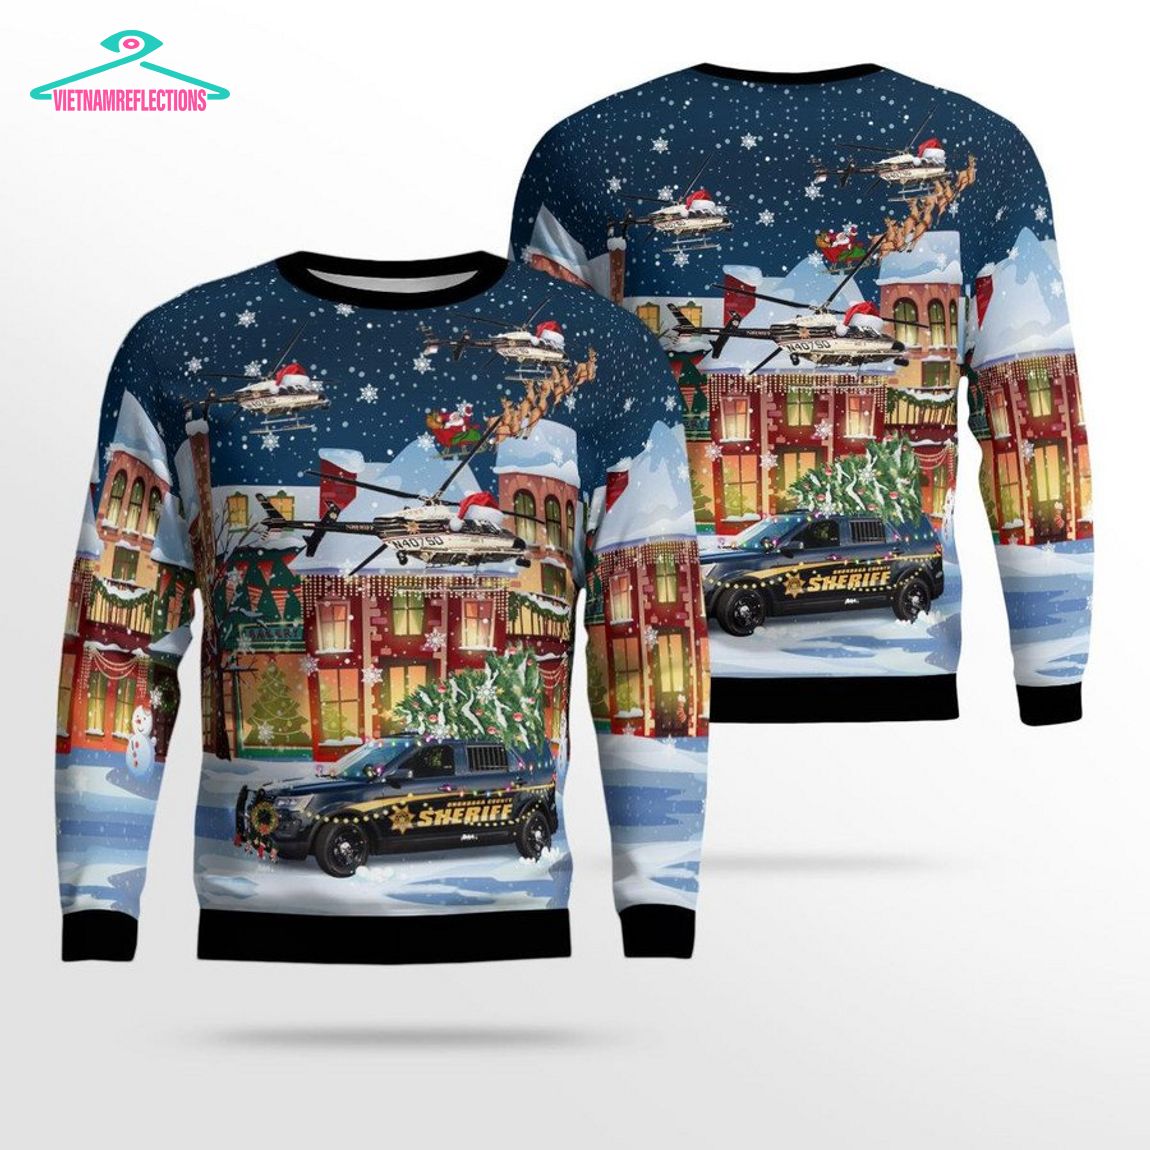 New York Onondaga County Sheriff 3D Christmas Sweater - Natural and awesome